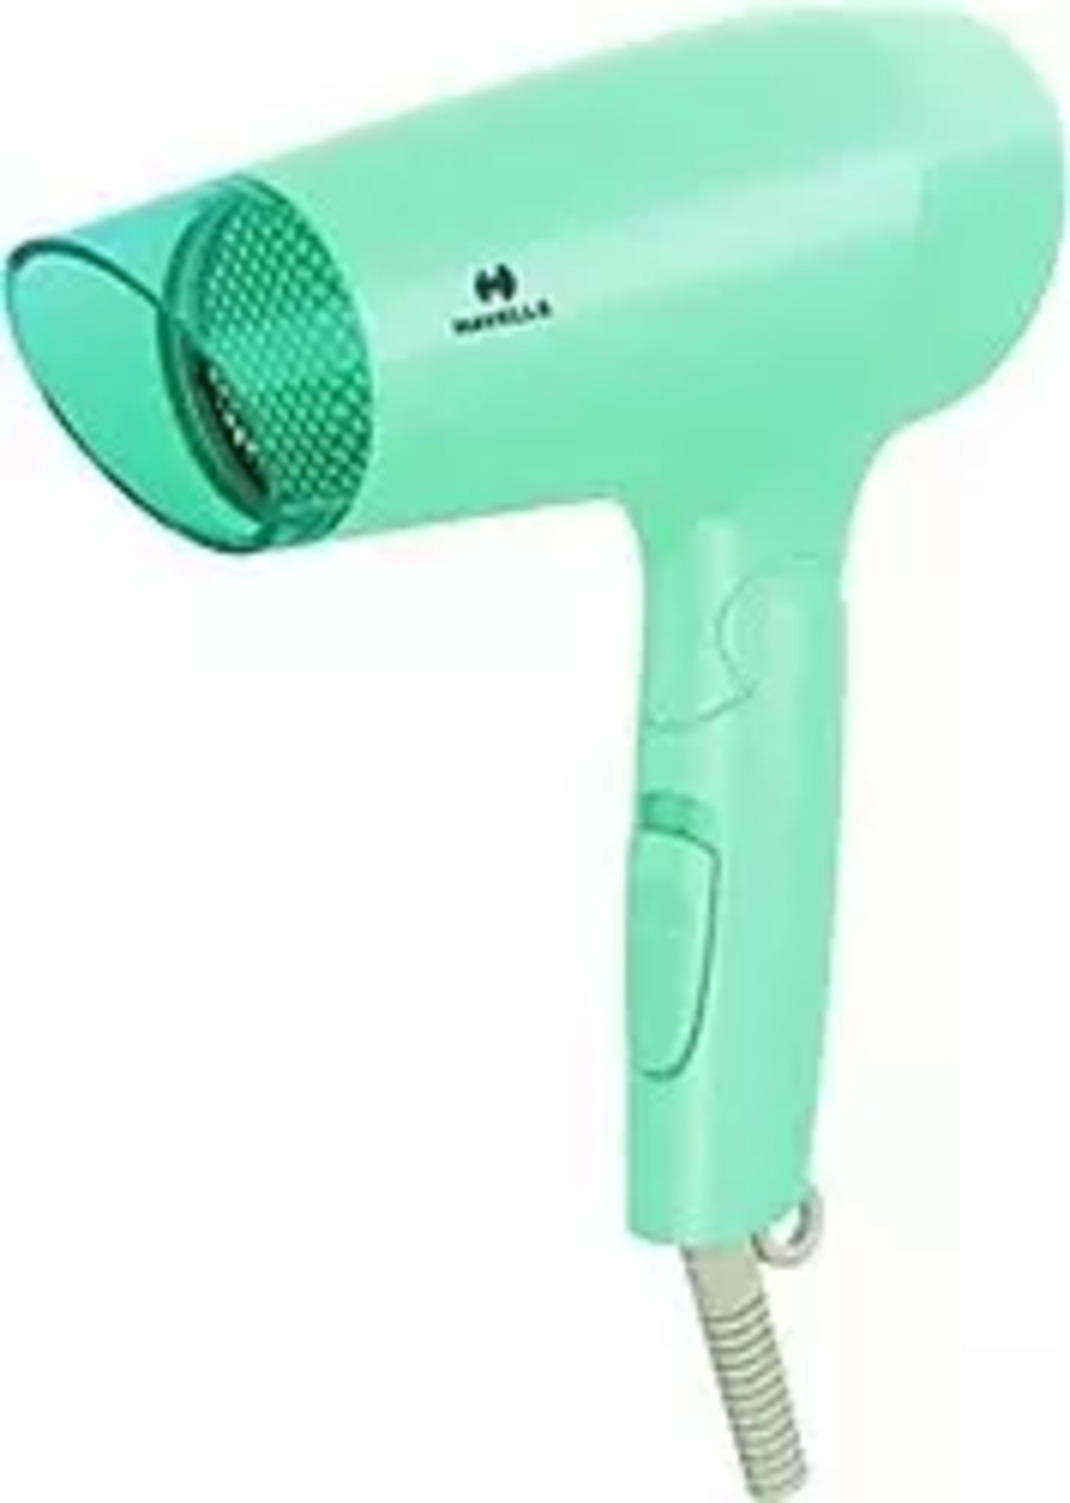 Compare Havells HD2222 Hair Dryer (Blue) vs Havells HD3151 Hair Dryer  (Turquoise) vs Havells HD3152 Hair Dryer (Pink) - Havells HD2222 Hair Dryer  (Blue) vs Havells HD3151 Hair Dryer (Turquoise) vs Havells